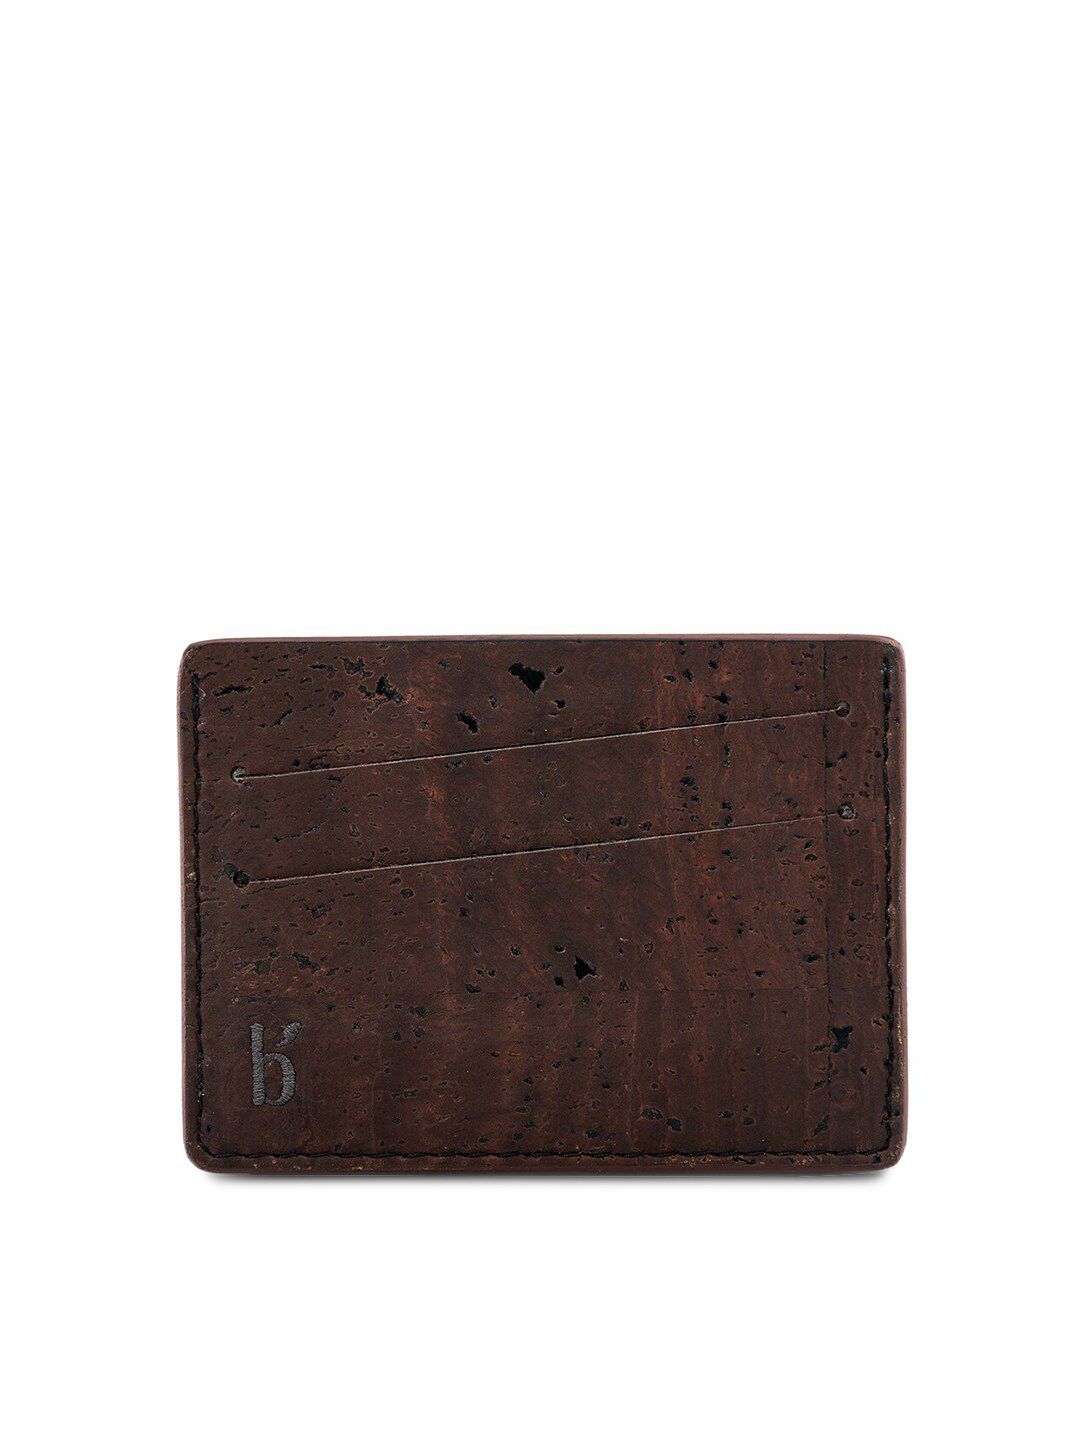 Beej Unisex Brown & Black Textured Sustainable Card Holder Price in India